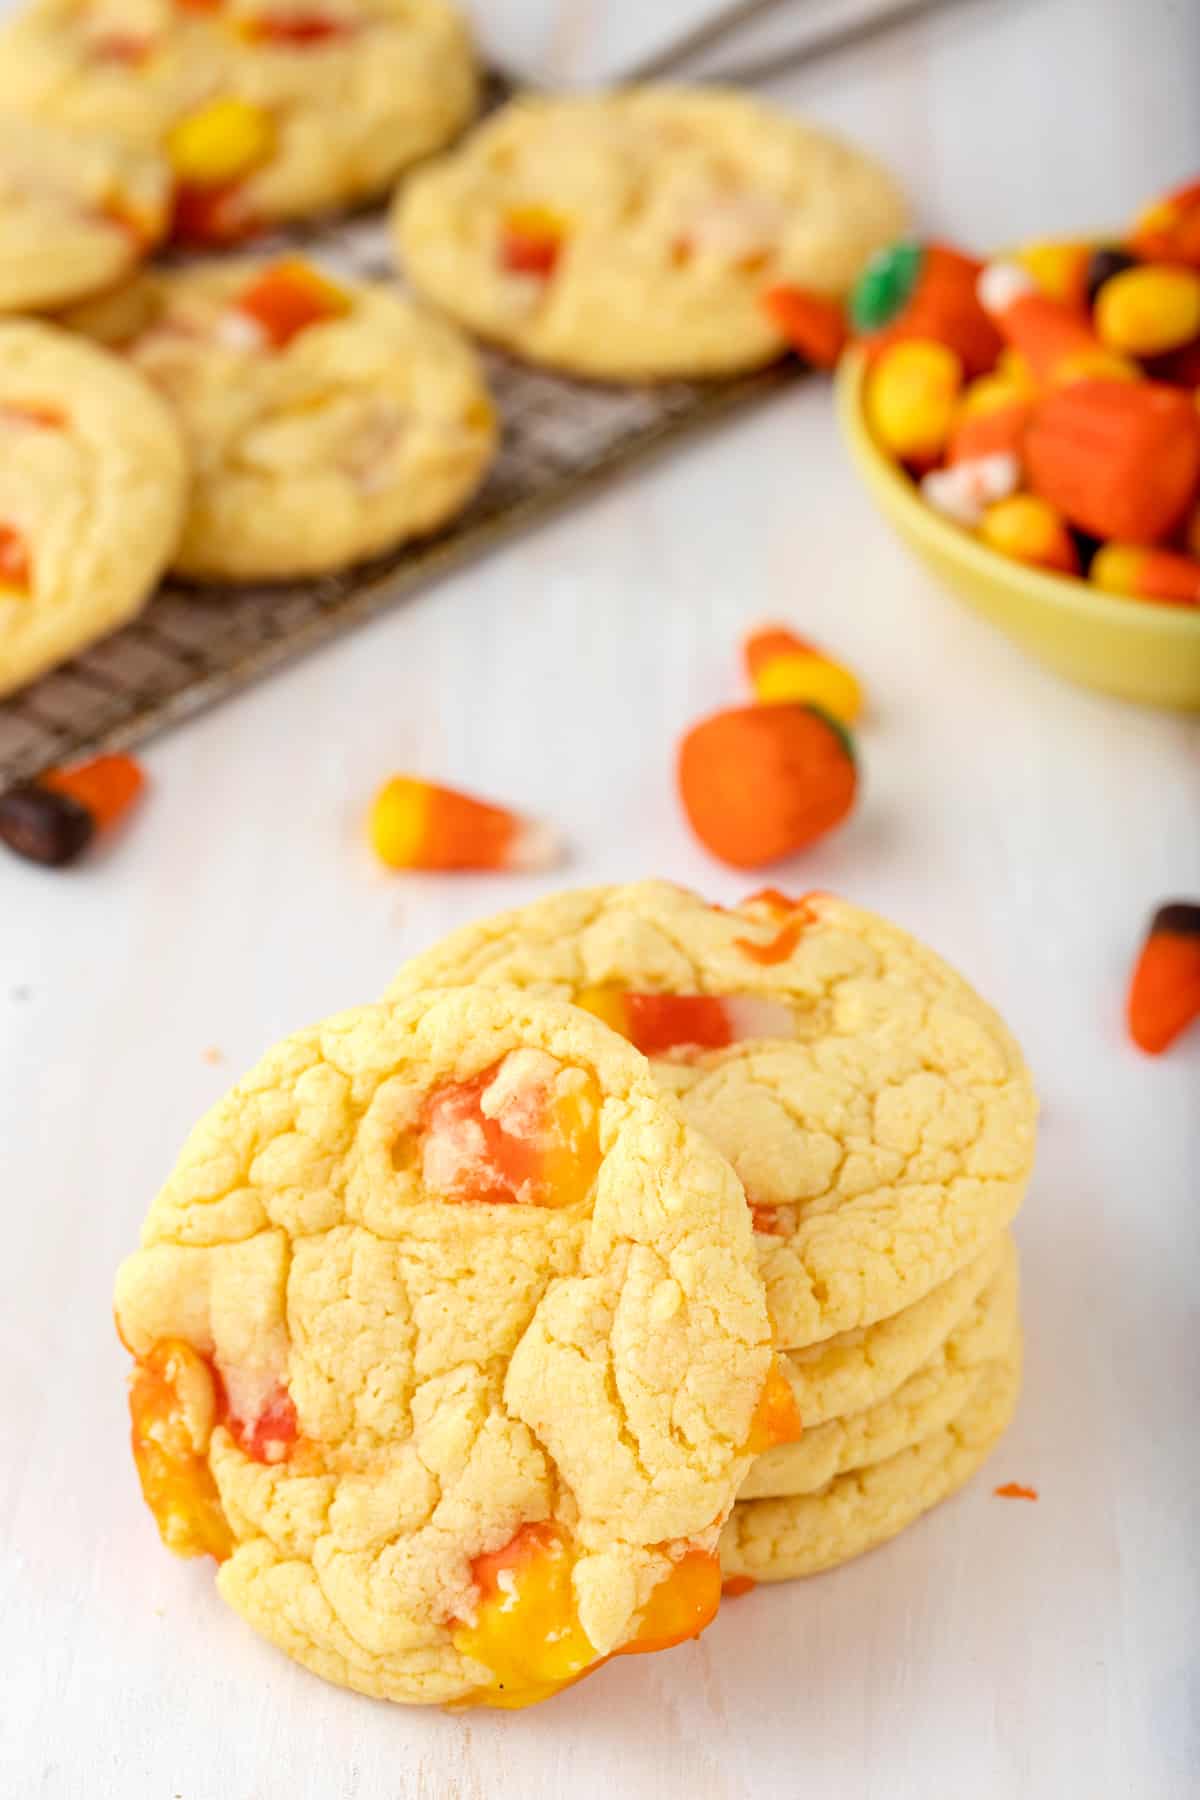 Candy Corn Cake Mix Cookies stacked on tabletop with one cookie on its side to show candy corn inside them. Extra candy corn and more cookies are on cooling rack in background.